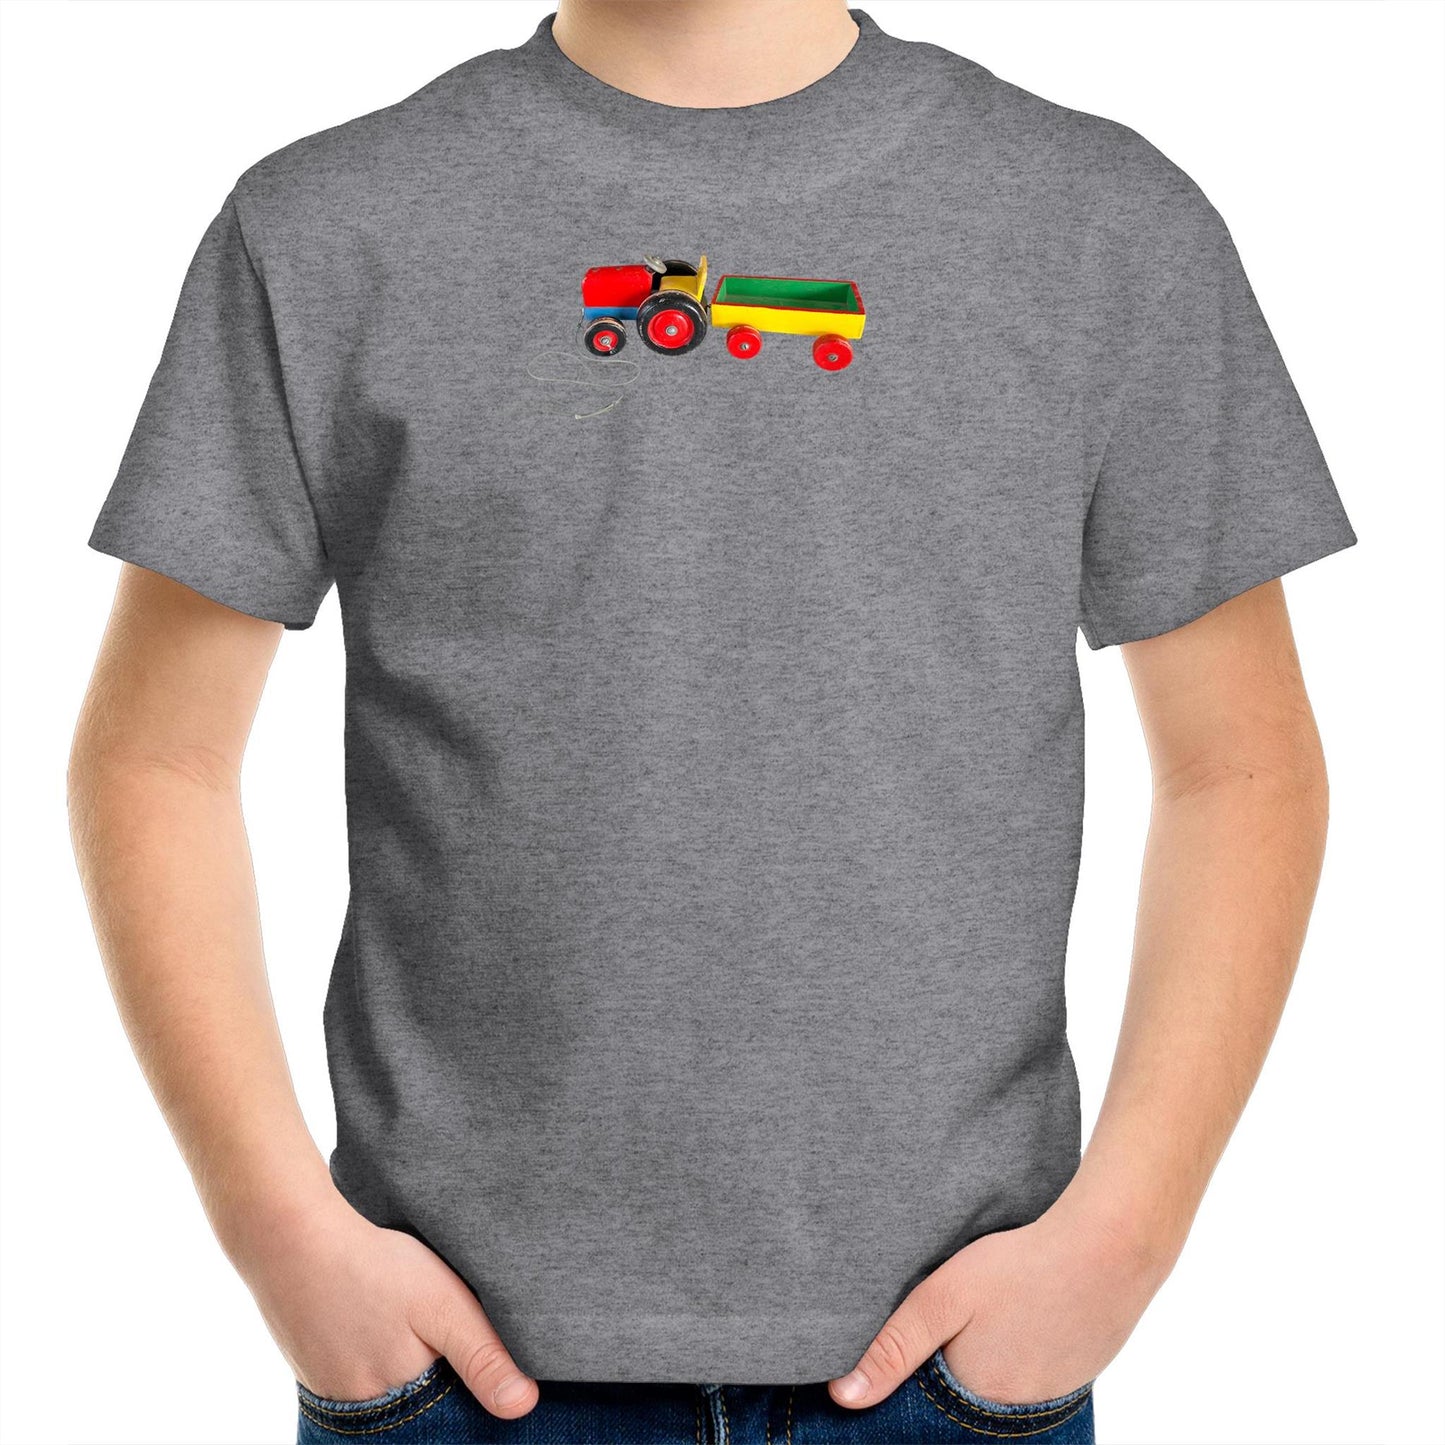 Toy Tractor T Shirts for Kids